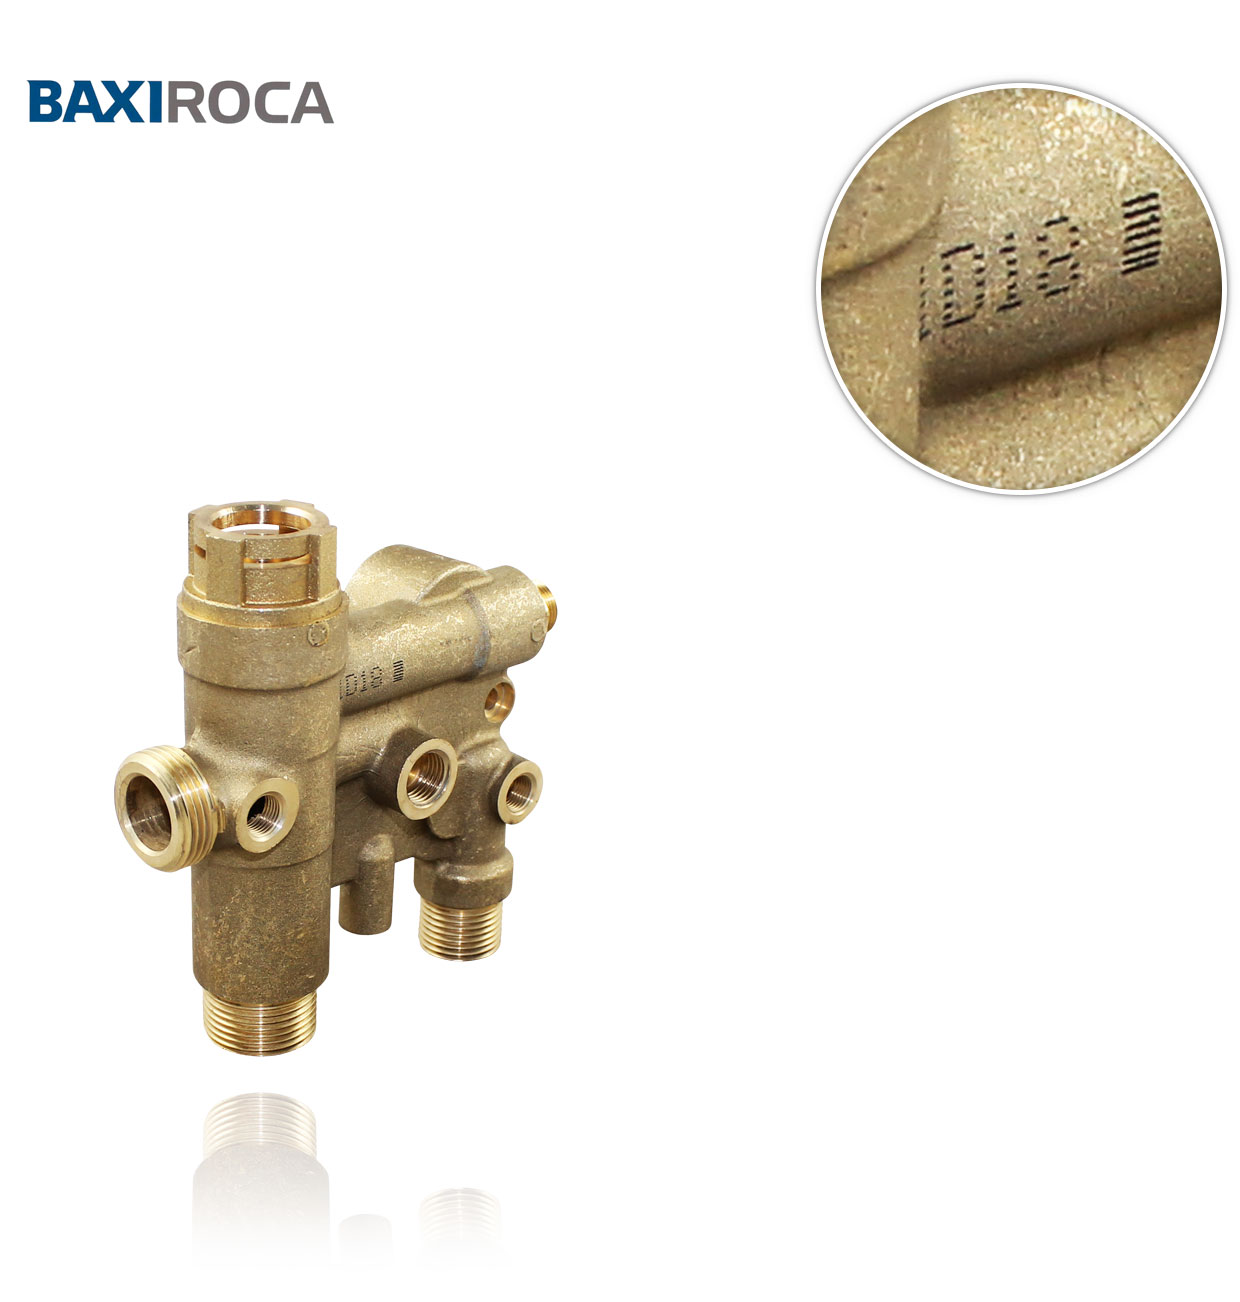 PLATINUM HYDROBLOCK WITH 3-WAY VALVE (WITH BYPASS) ROCA 125569604